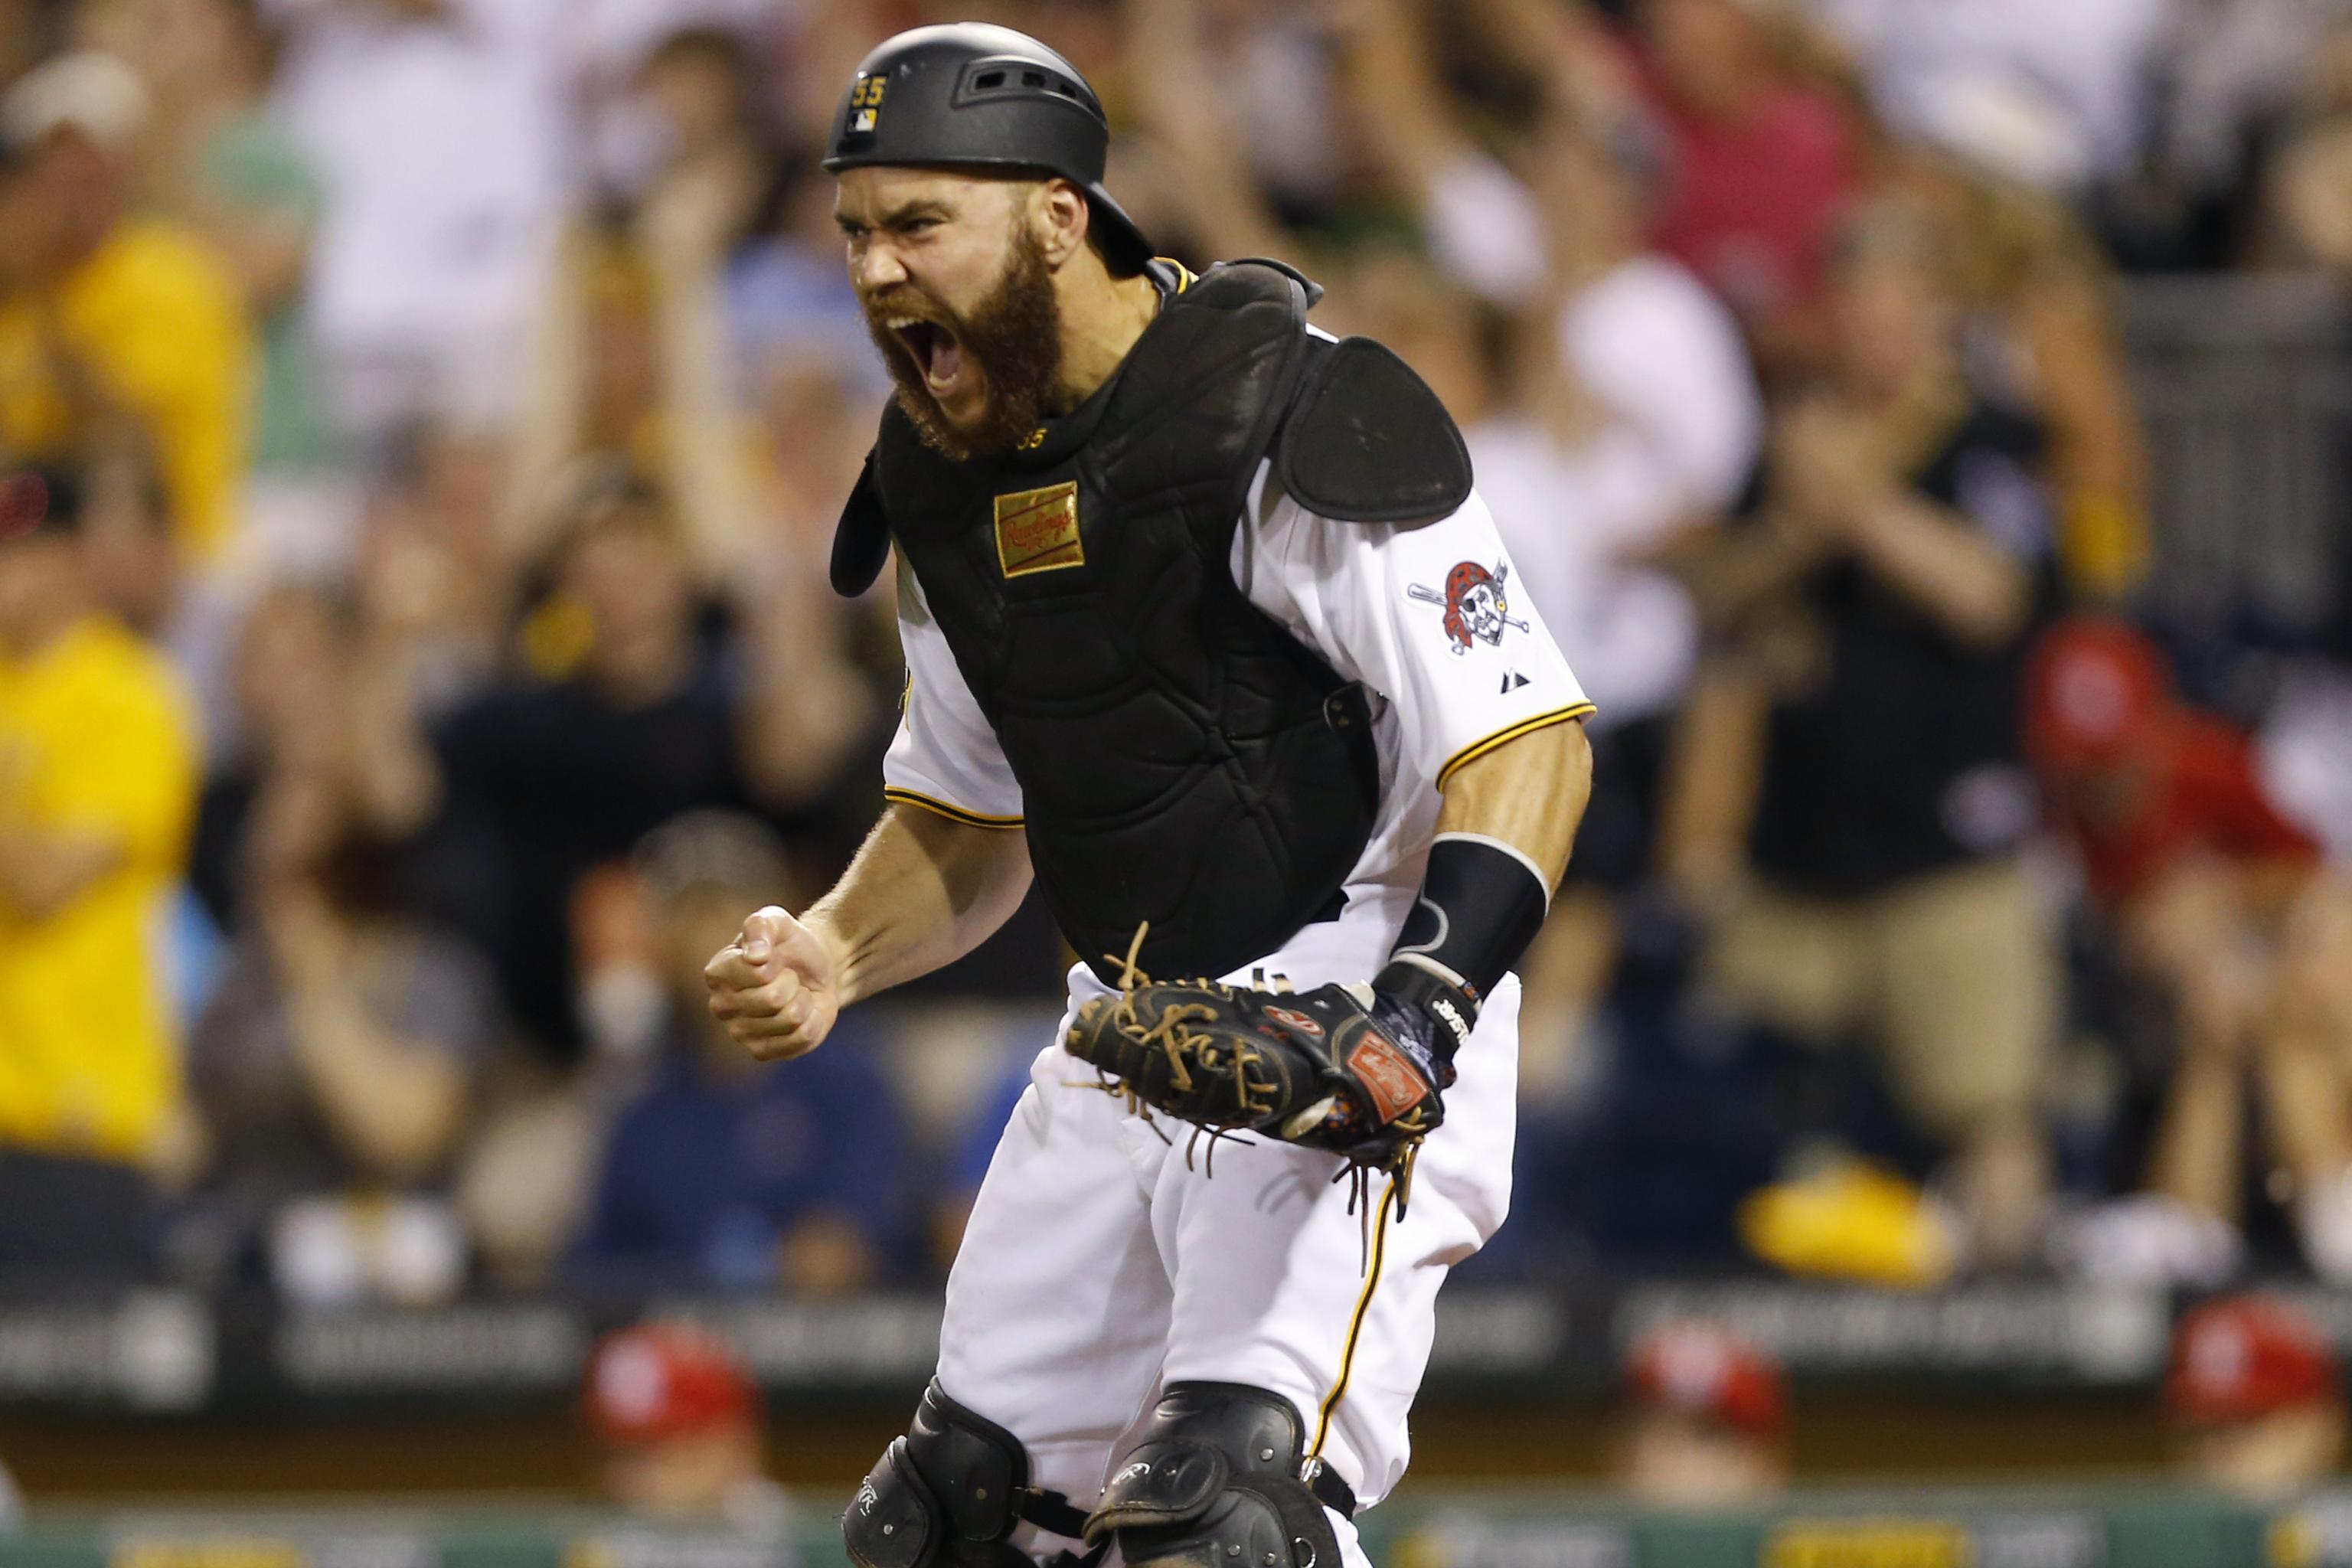 Pirates likely to acquire a catcher if Russell Martin departs - Bucs Dugout